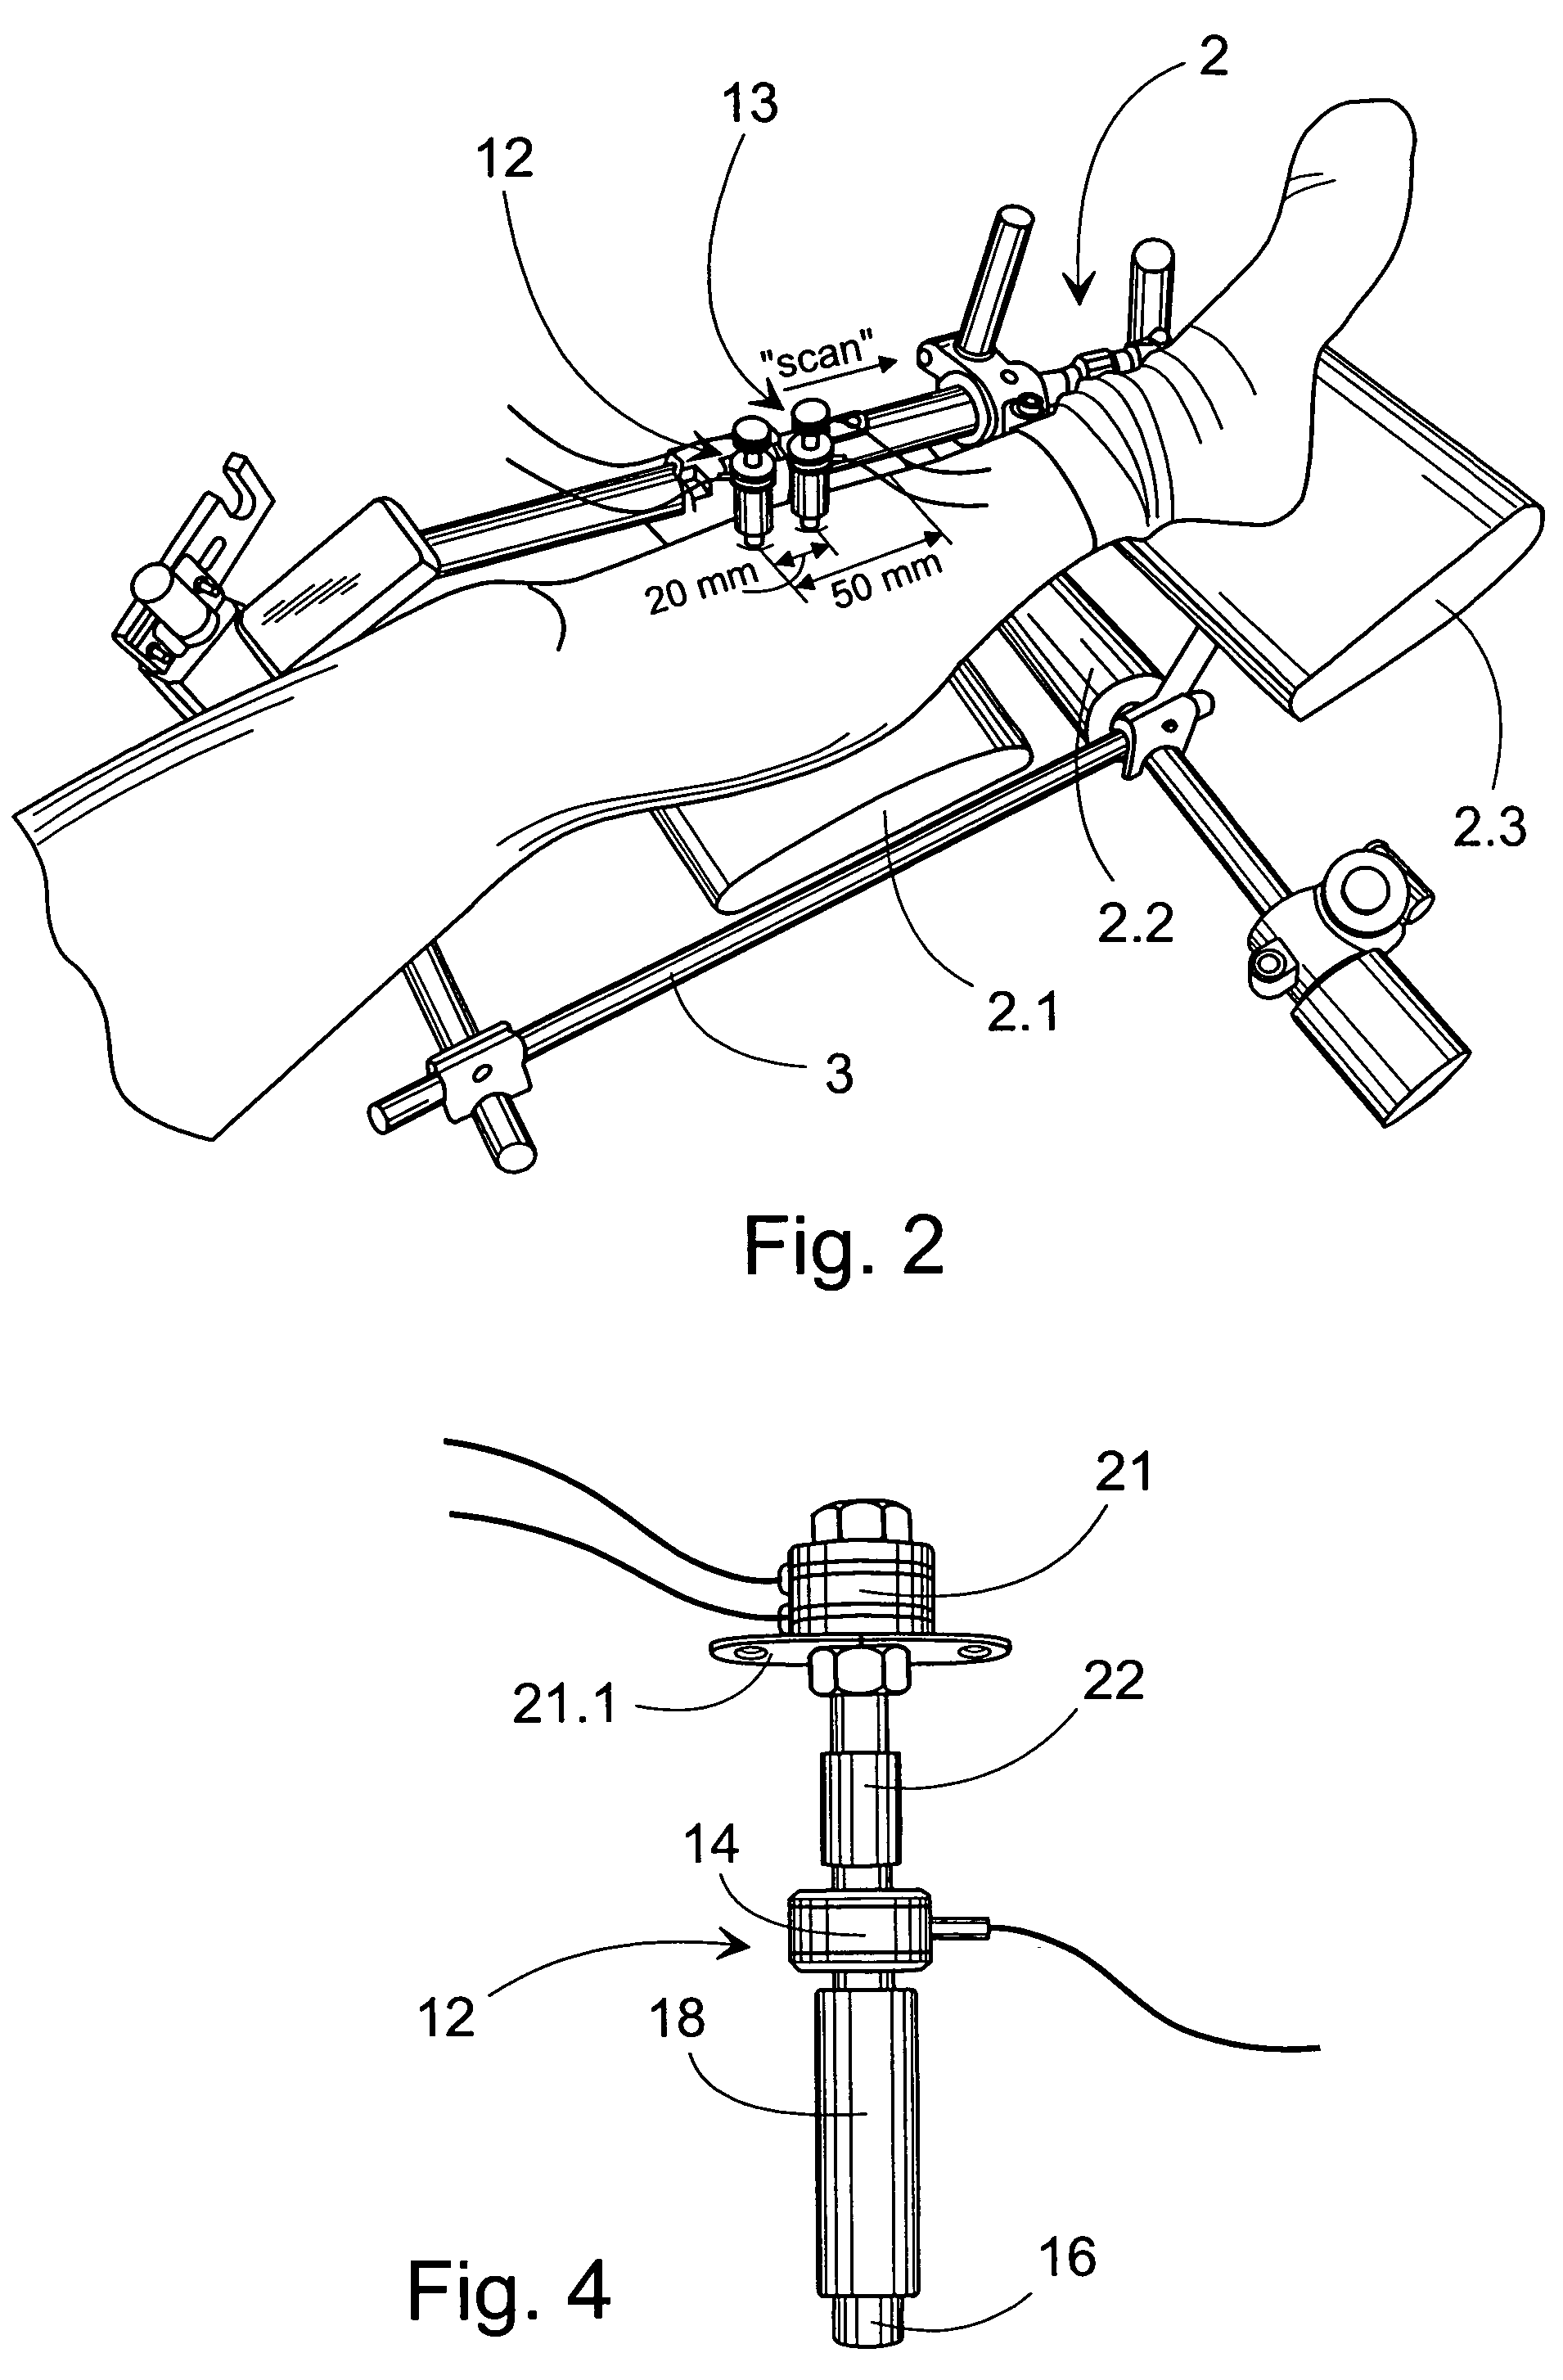 Method and device for the non-invasive assessment of bones